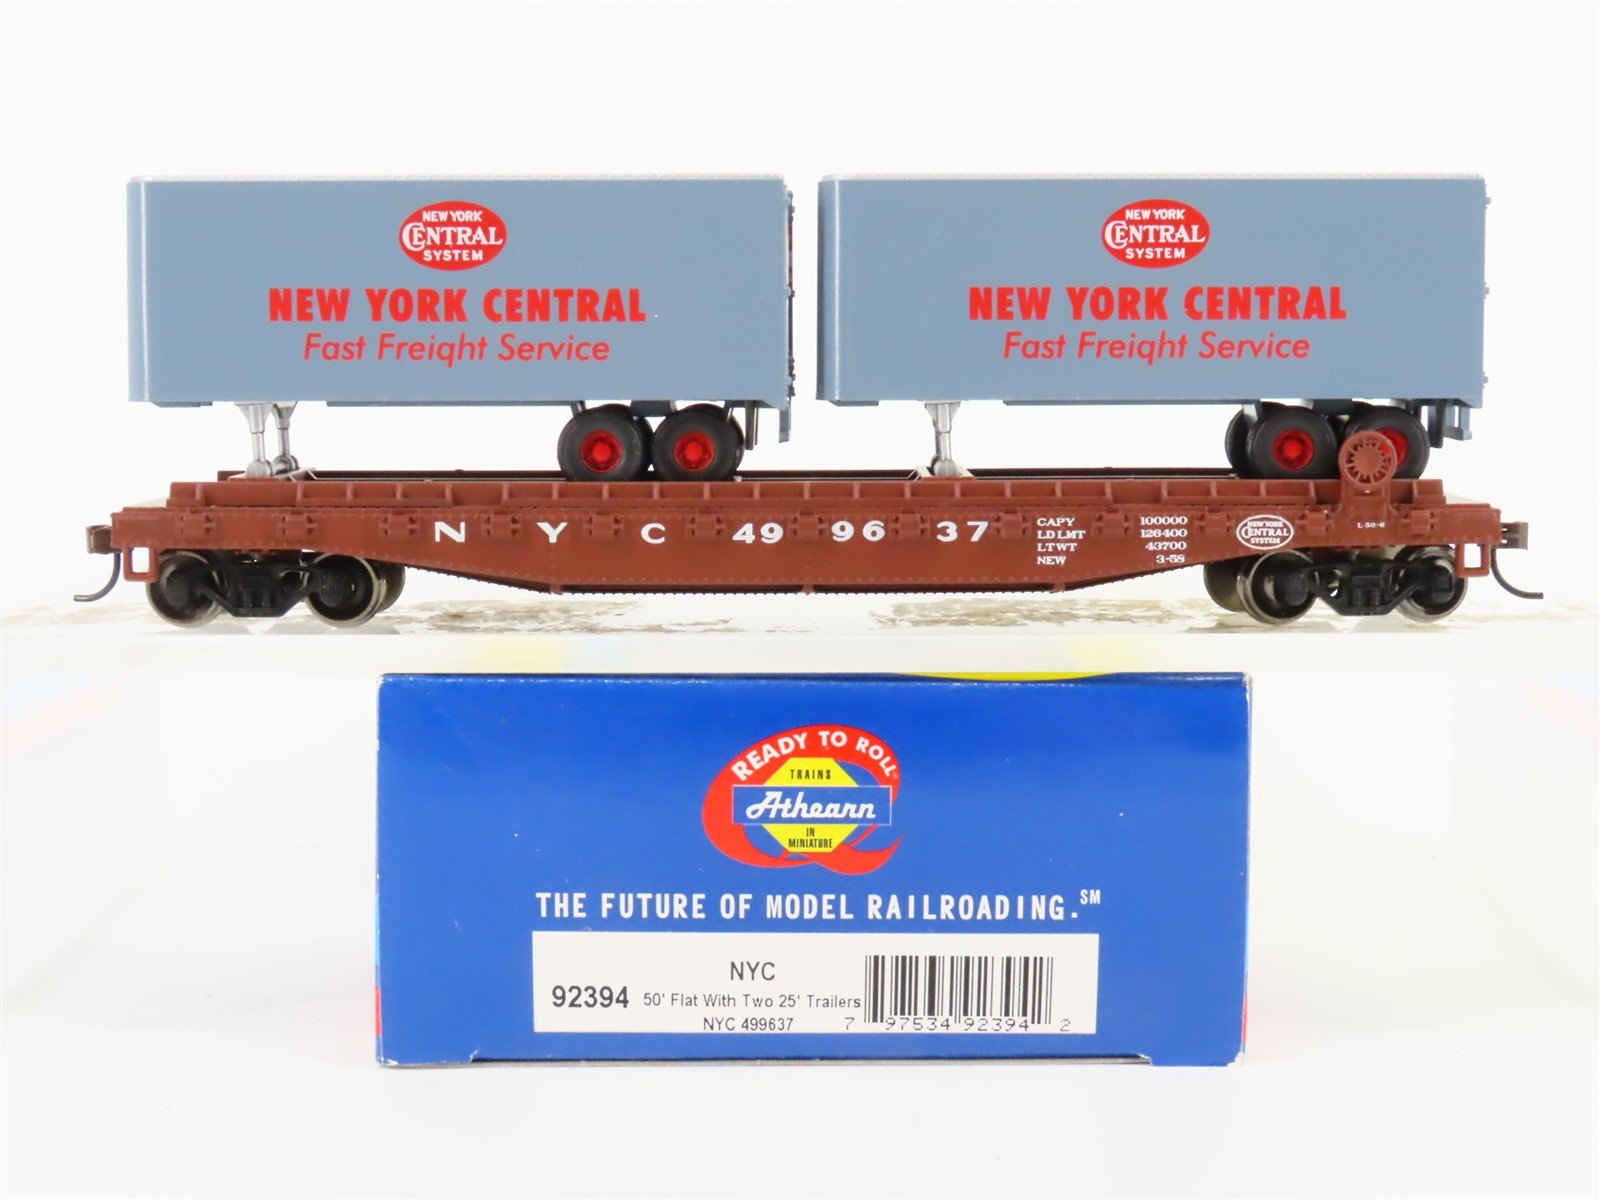 HO Scale Athearn 92394 NYC New York Central 50' Flatcar #499637 w/Trailers